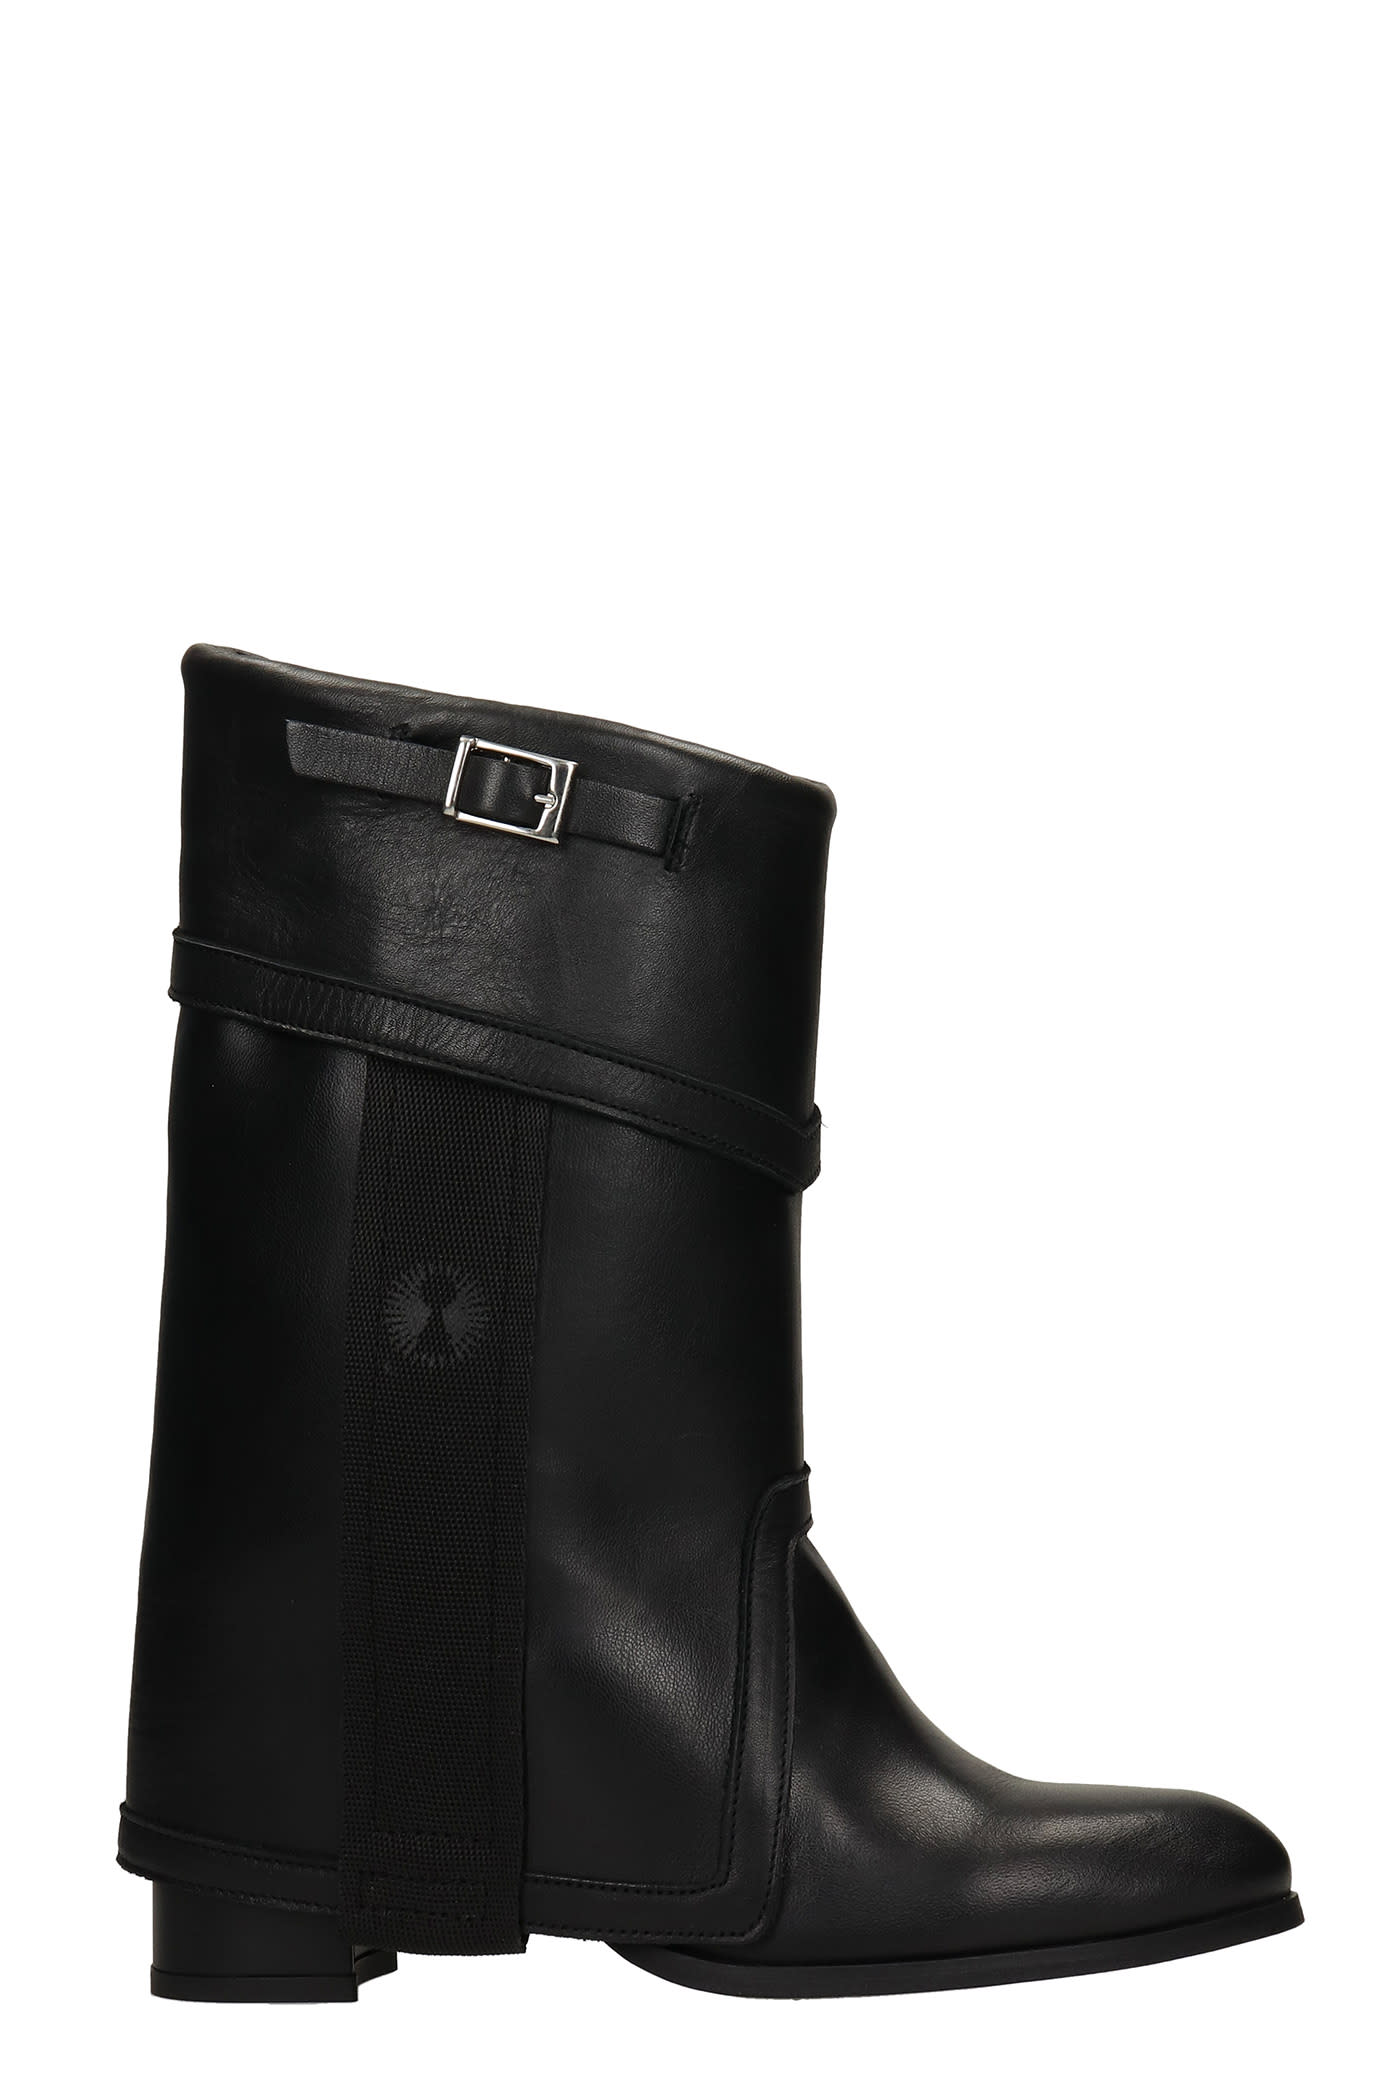 Bruno Bordese Sofi High Heels Ankle Boots In Black Leather